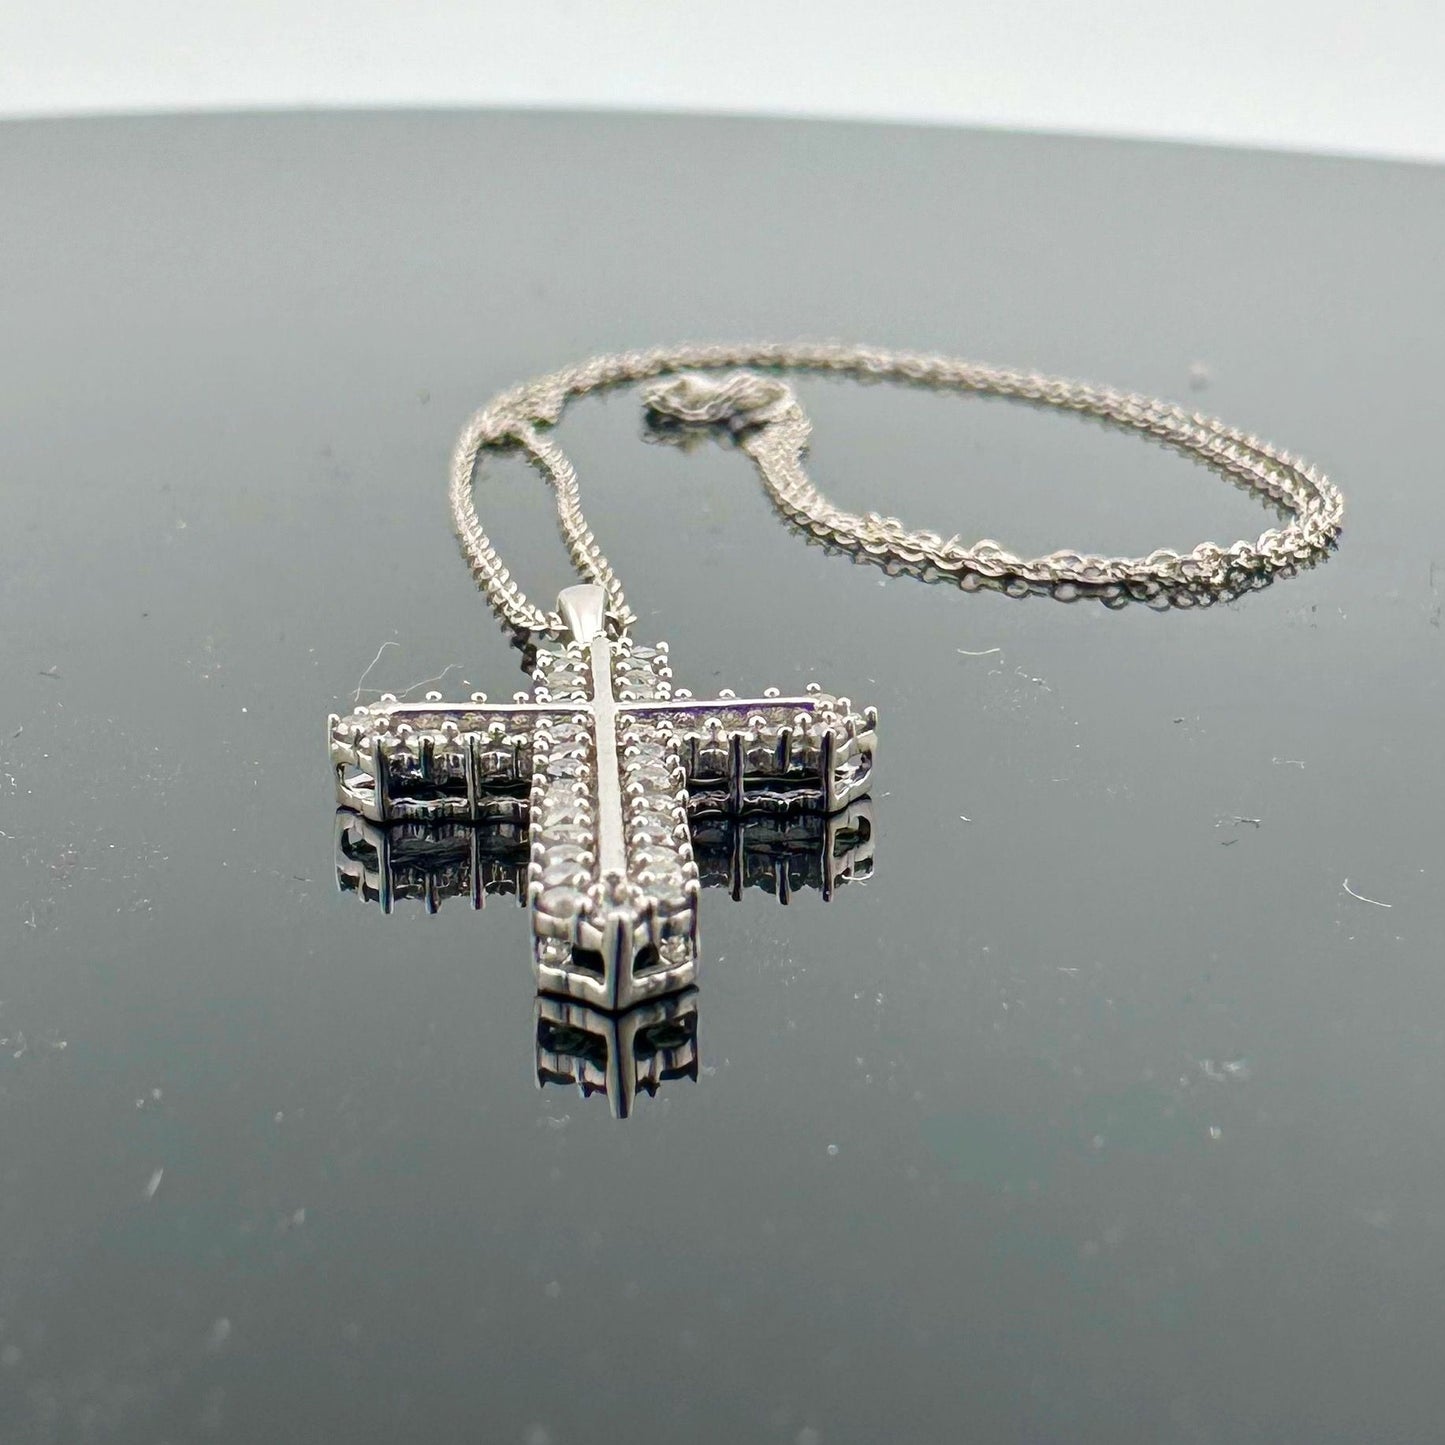 Shimmering 1/2 ct Diamond Cross Necklace - Sterling SIlver